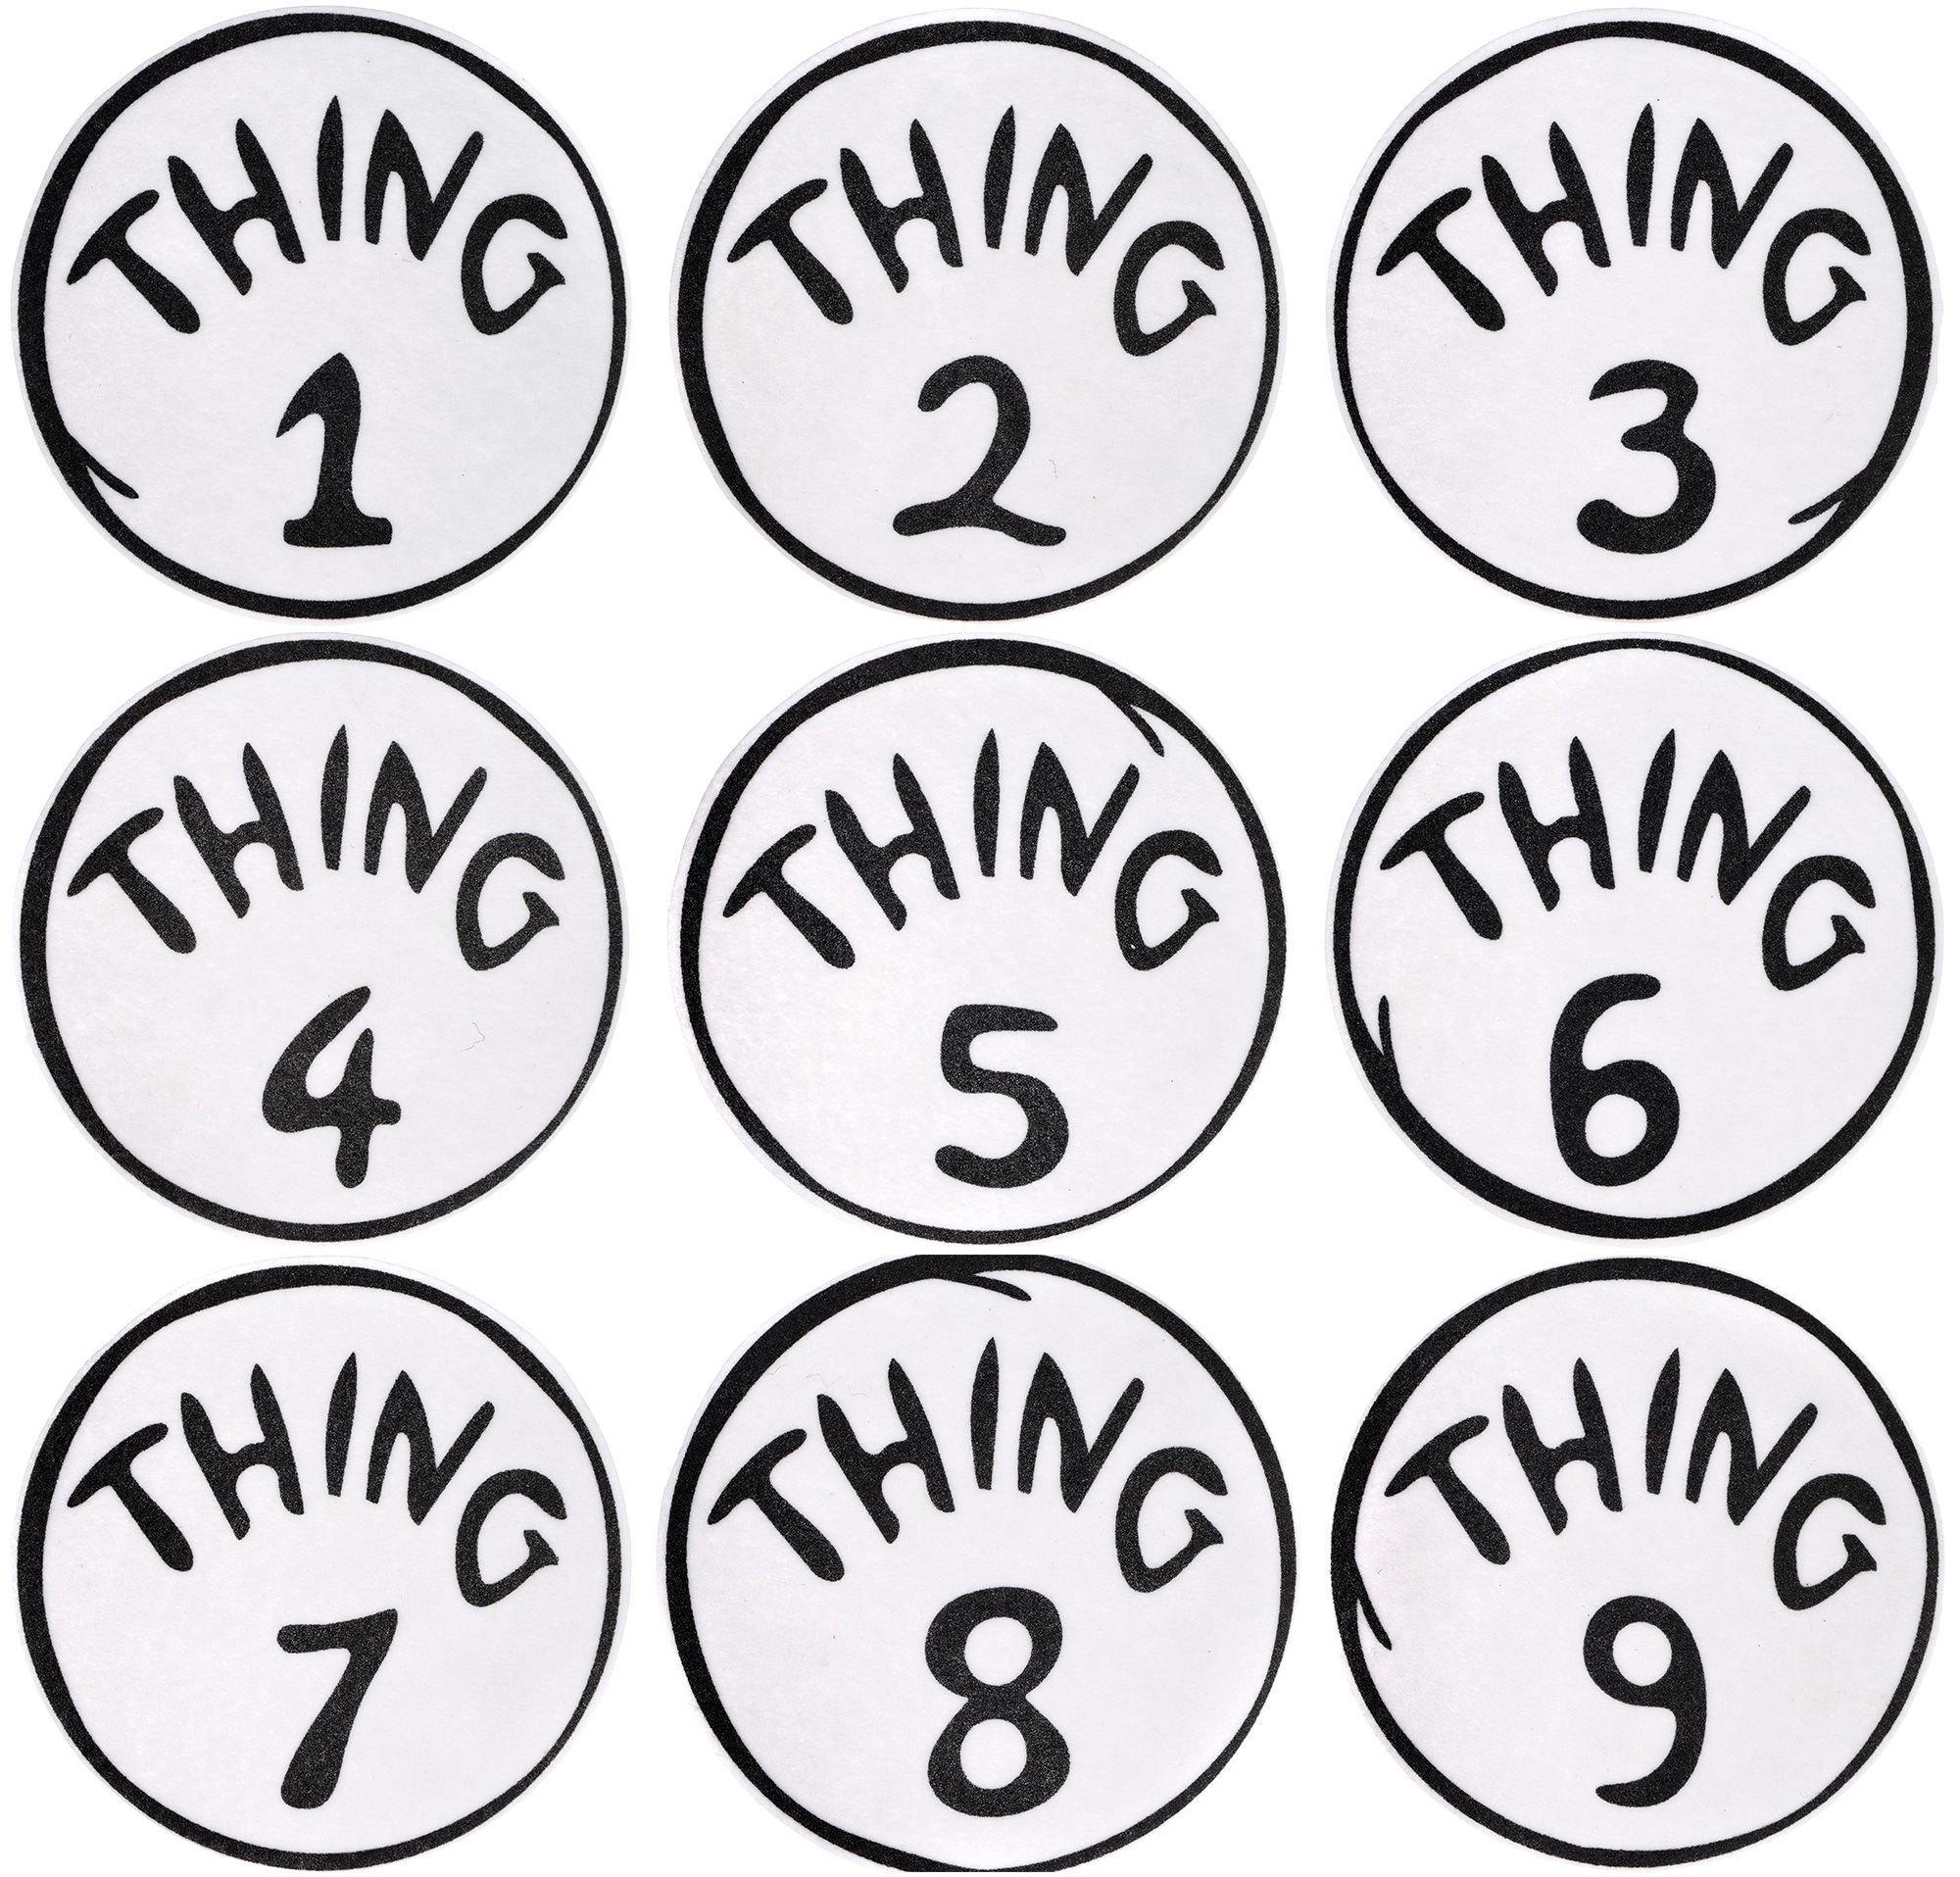 Thing 1 to Thing 9 Iron-On Patches 9ct - Dr. Seuss | Party City